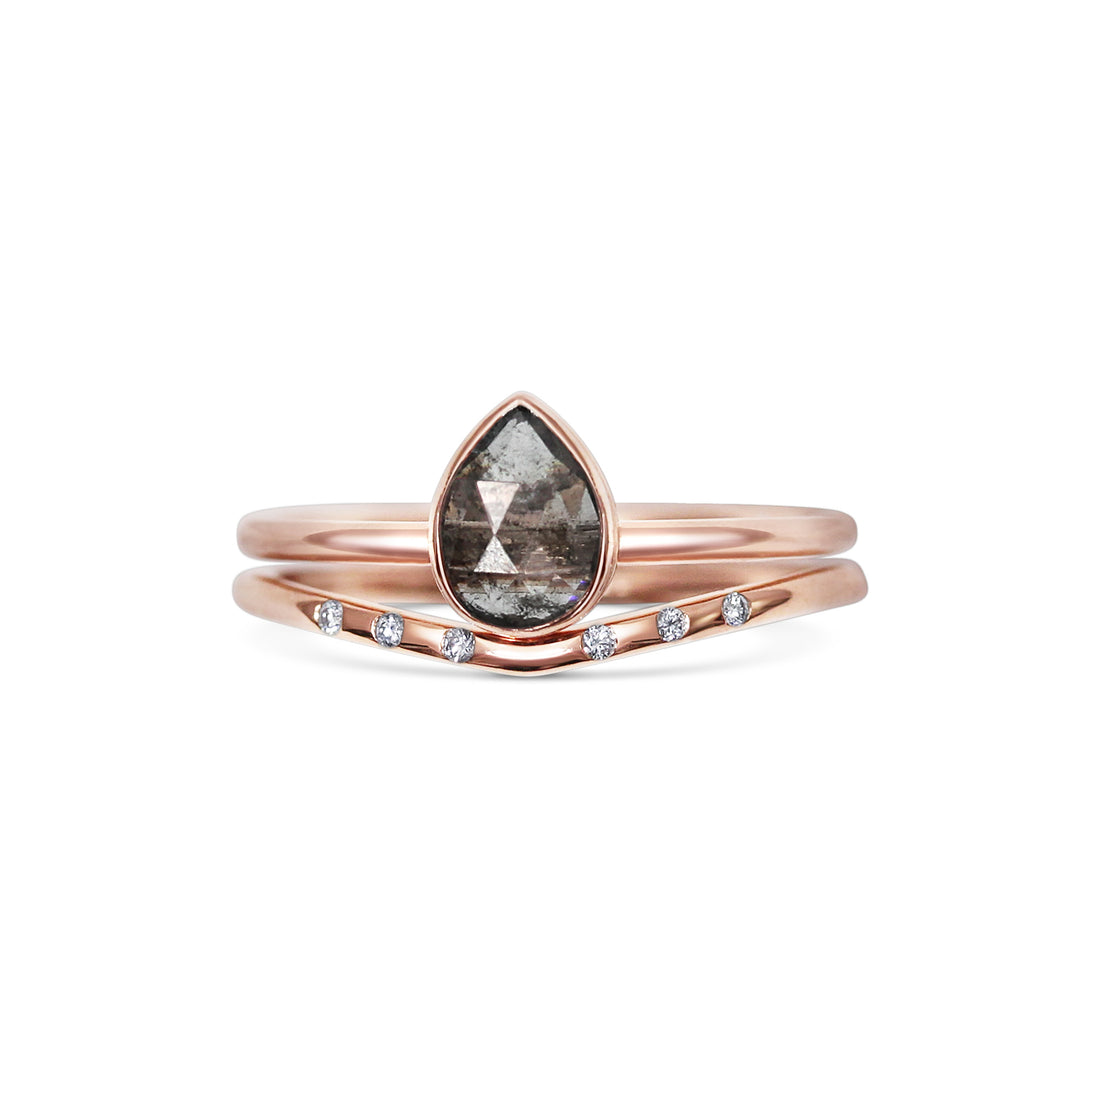  Grey Diamond & Rose Gold Set by Michelle Oh | The Cut London